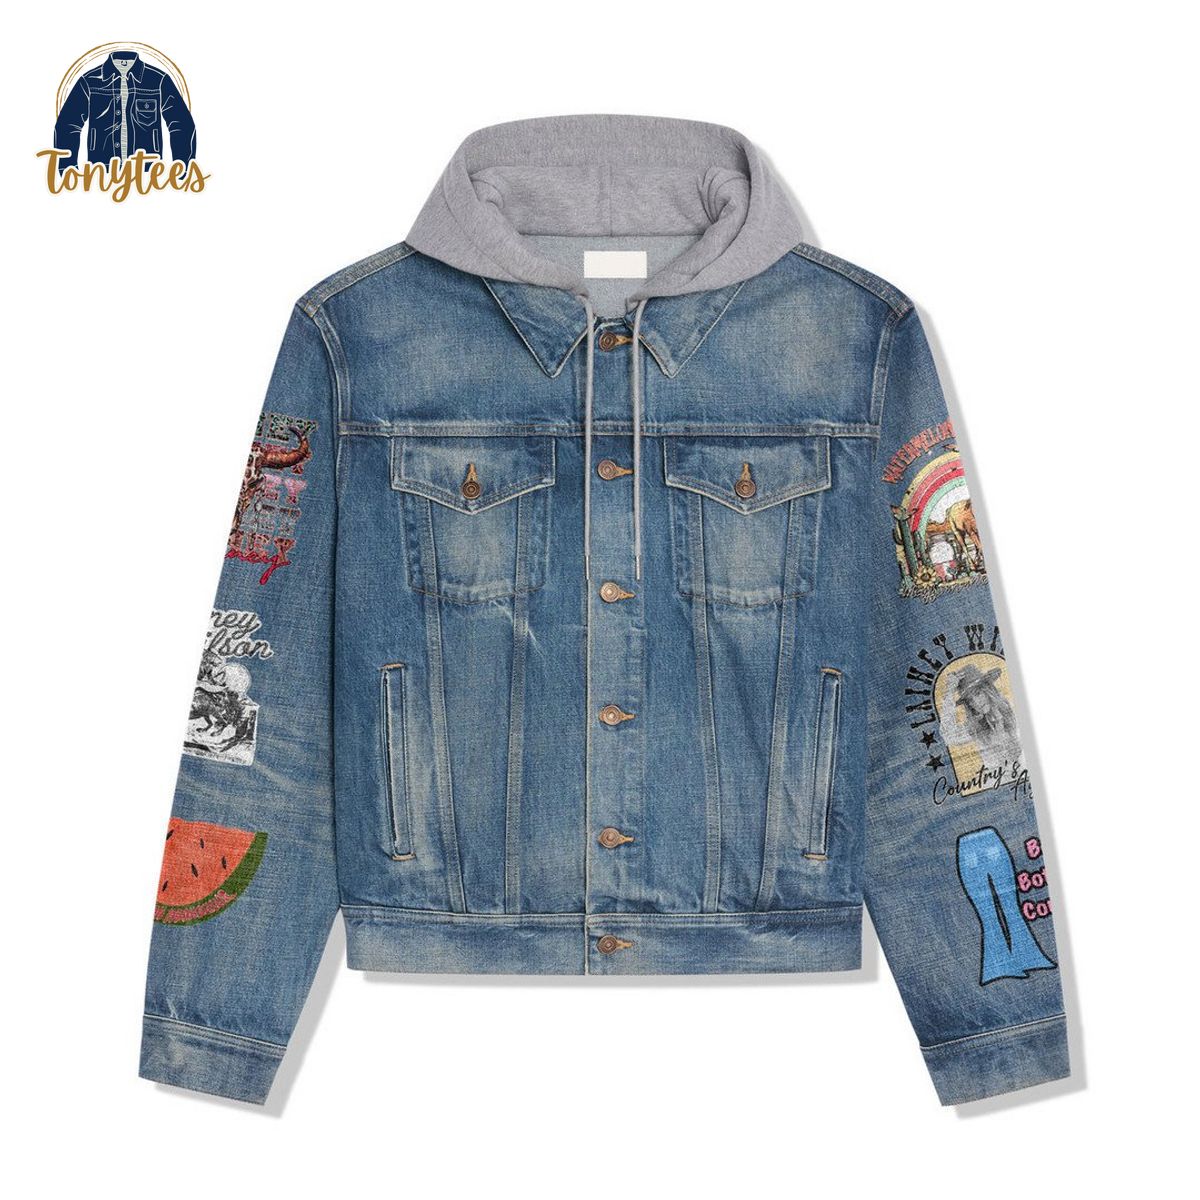 Lainey Wilson Country’s Cool Again Hooded Denim Jacket